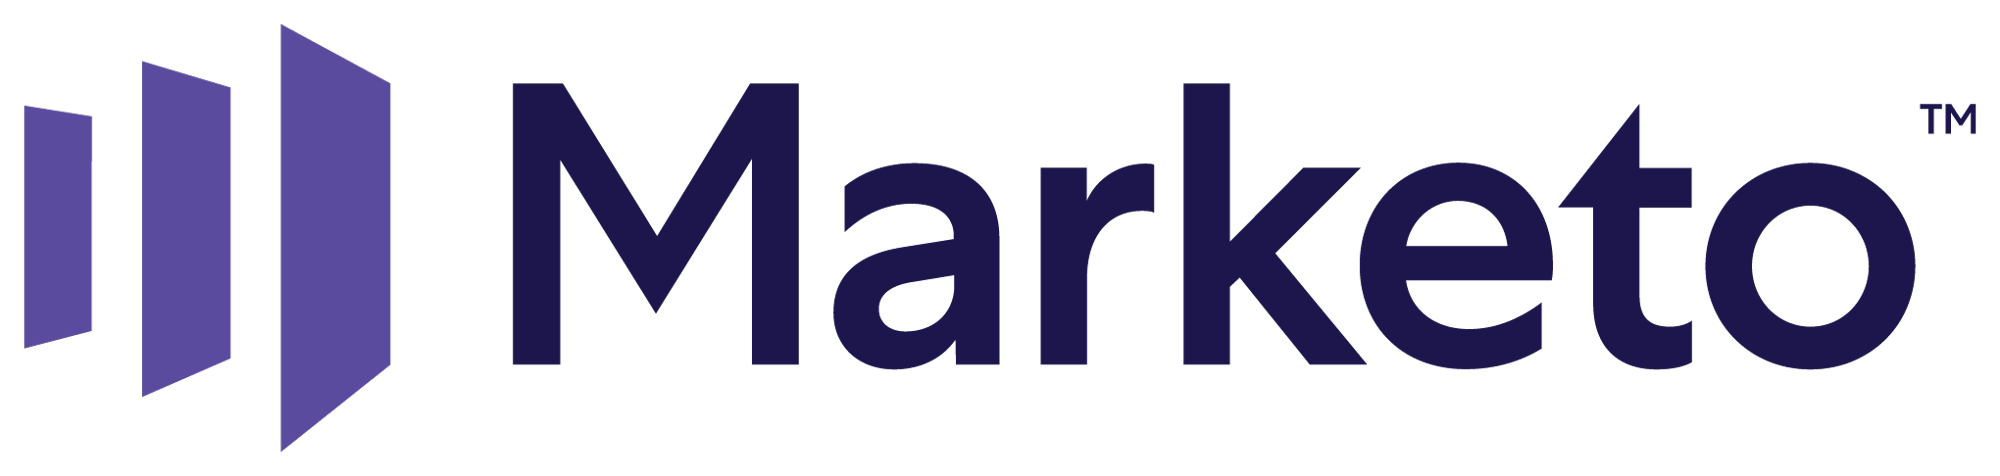 Follow Logo - Brand New: Follow-up: New Logo and Identity for Marketo by Focus Lab